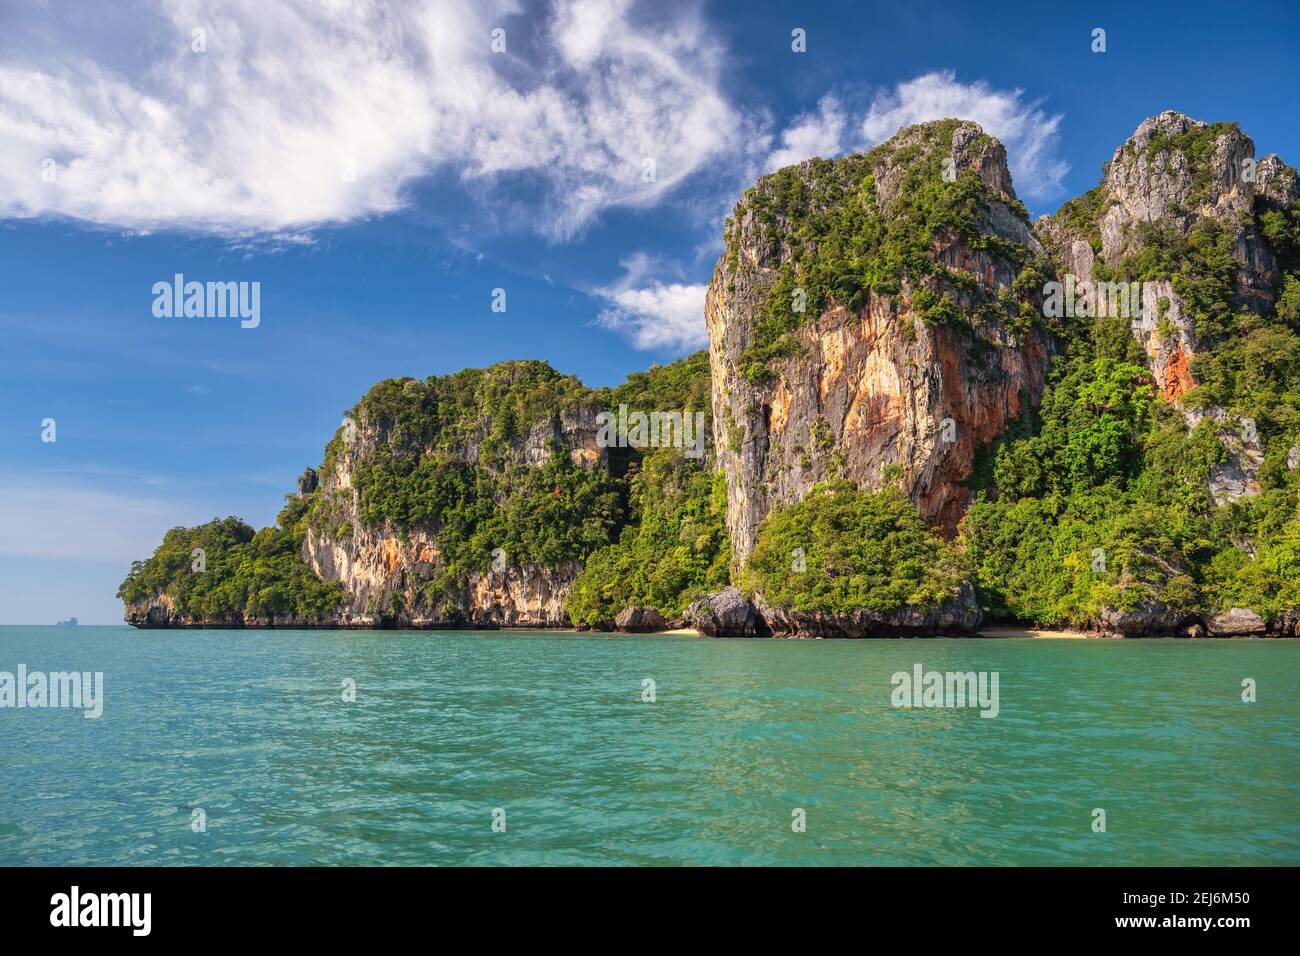 Tropical islands view with ocean blue sea water at Railay Beach, Krabi Thailand nature landscape Stock Photo